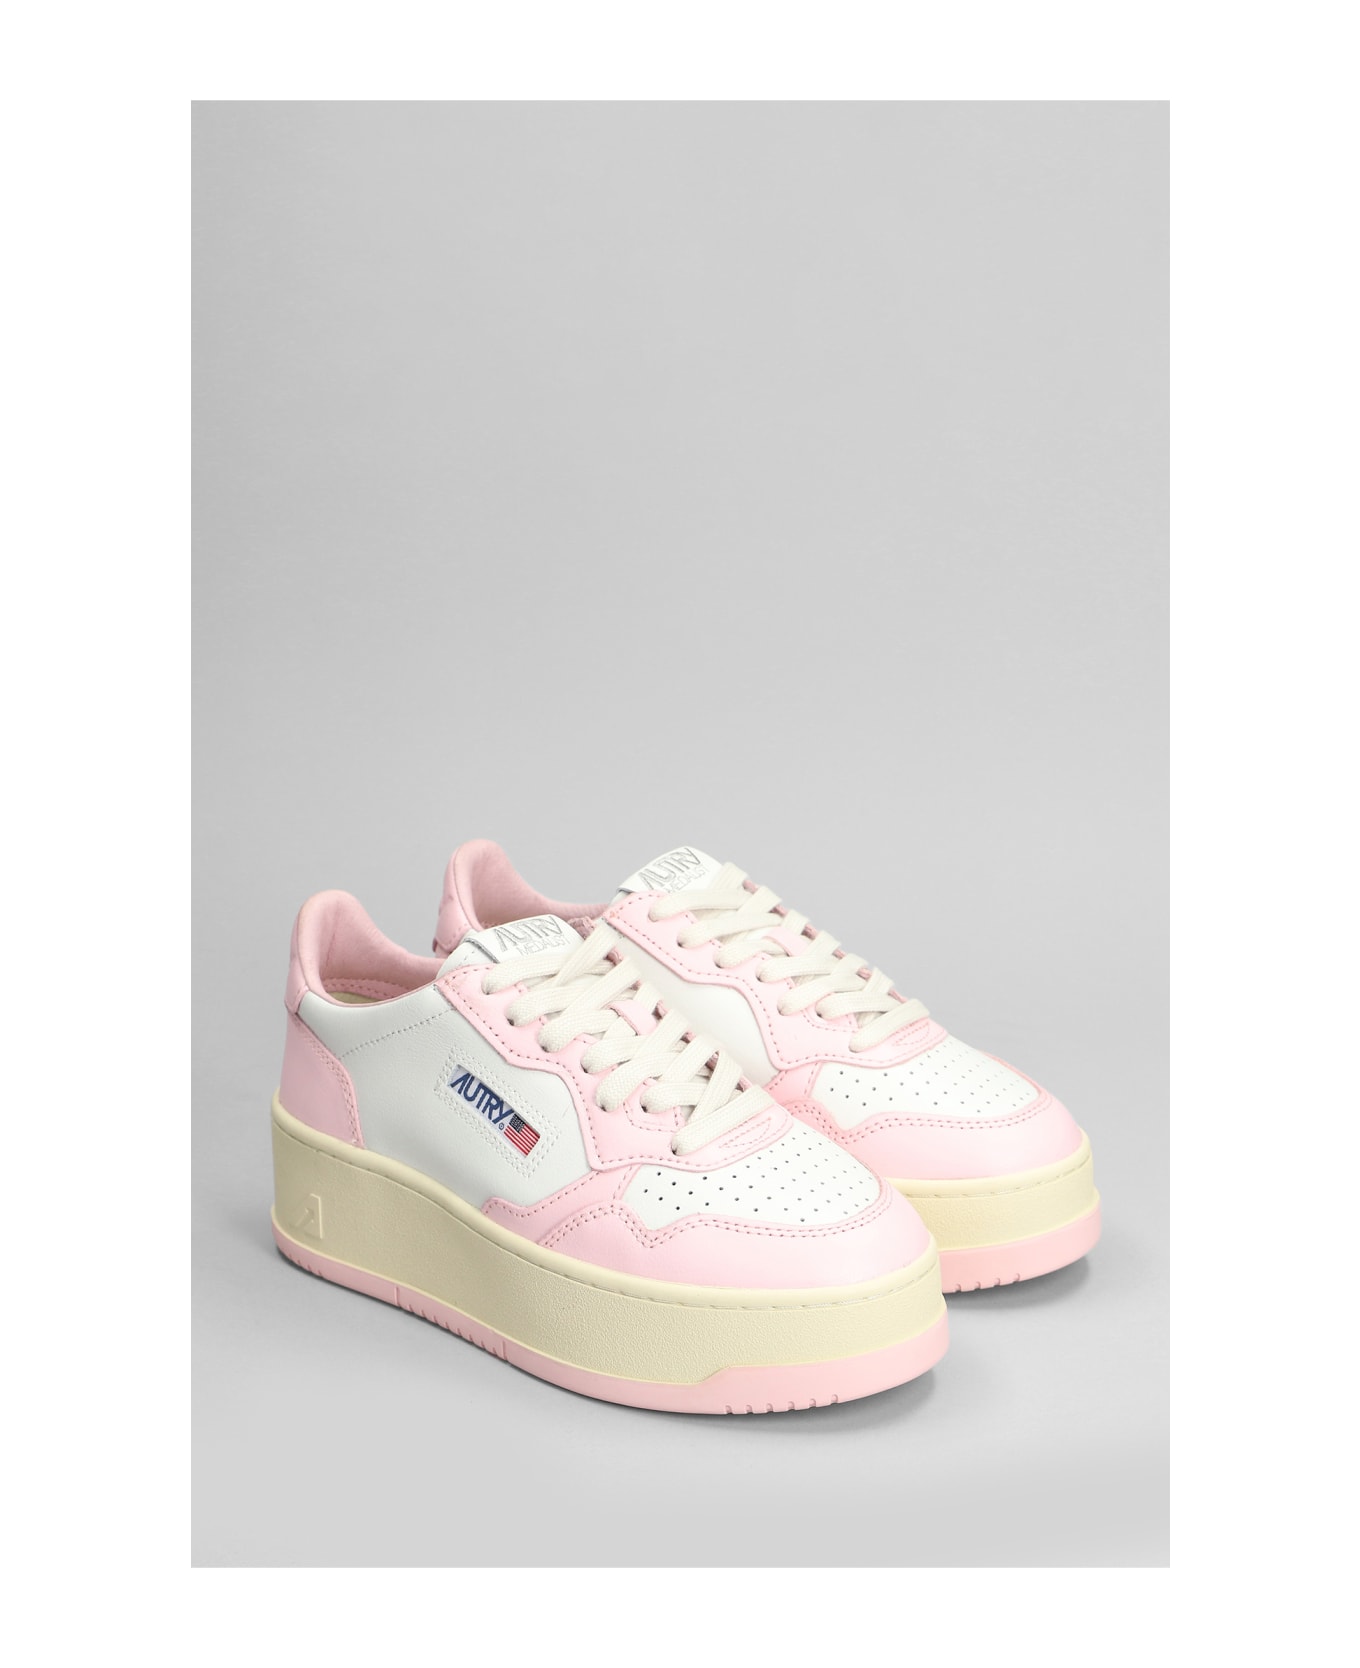 Autry Platform Low Sneakers In White Leather - Pink